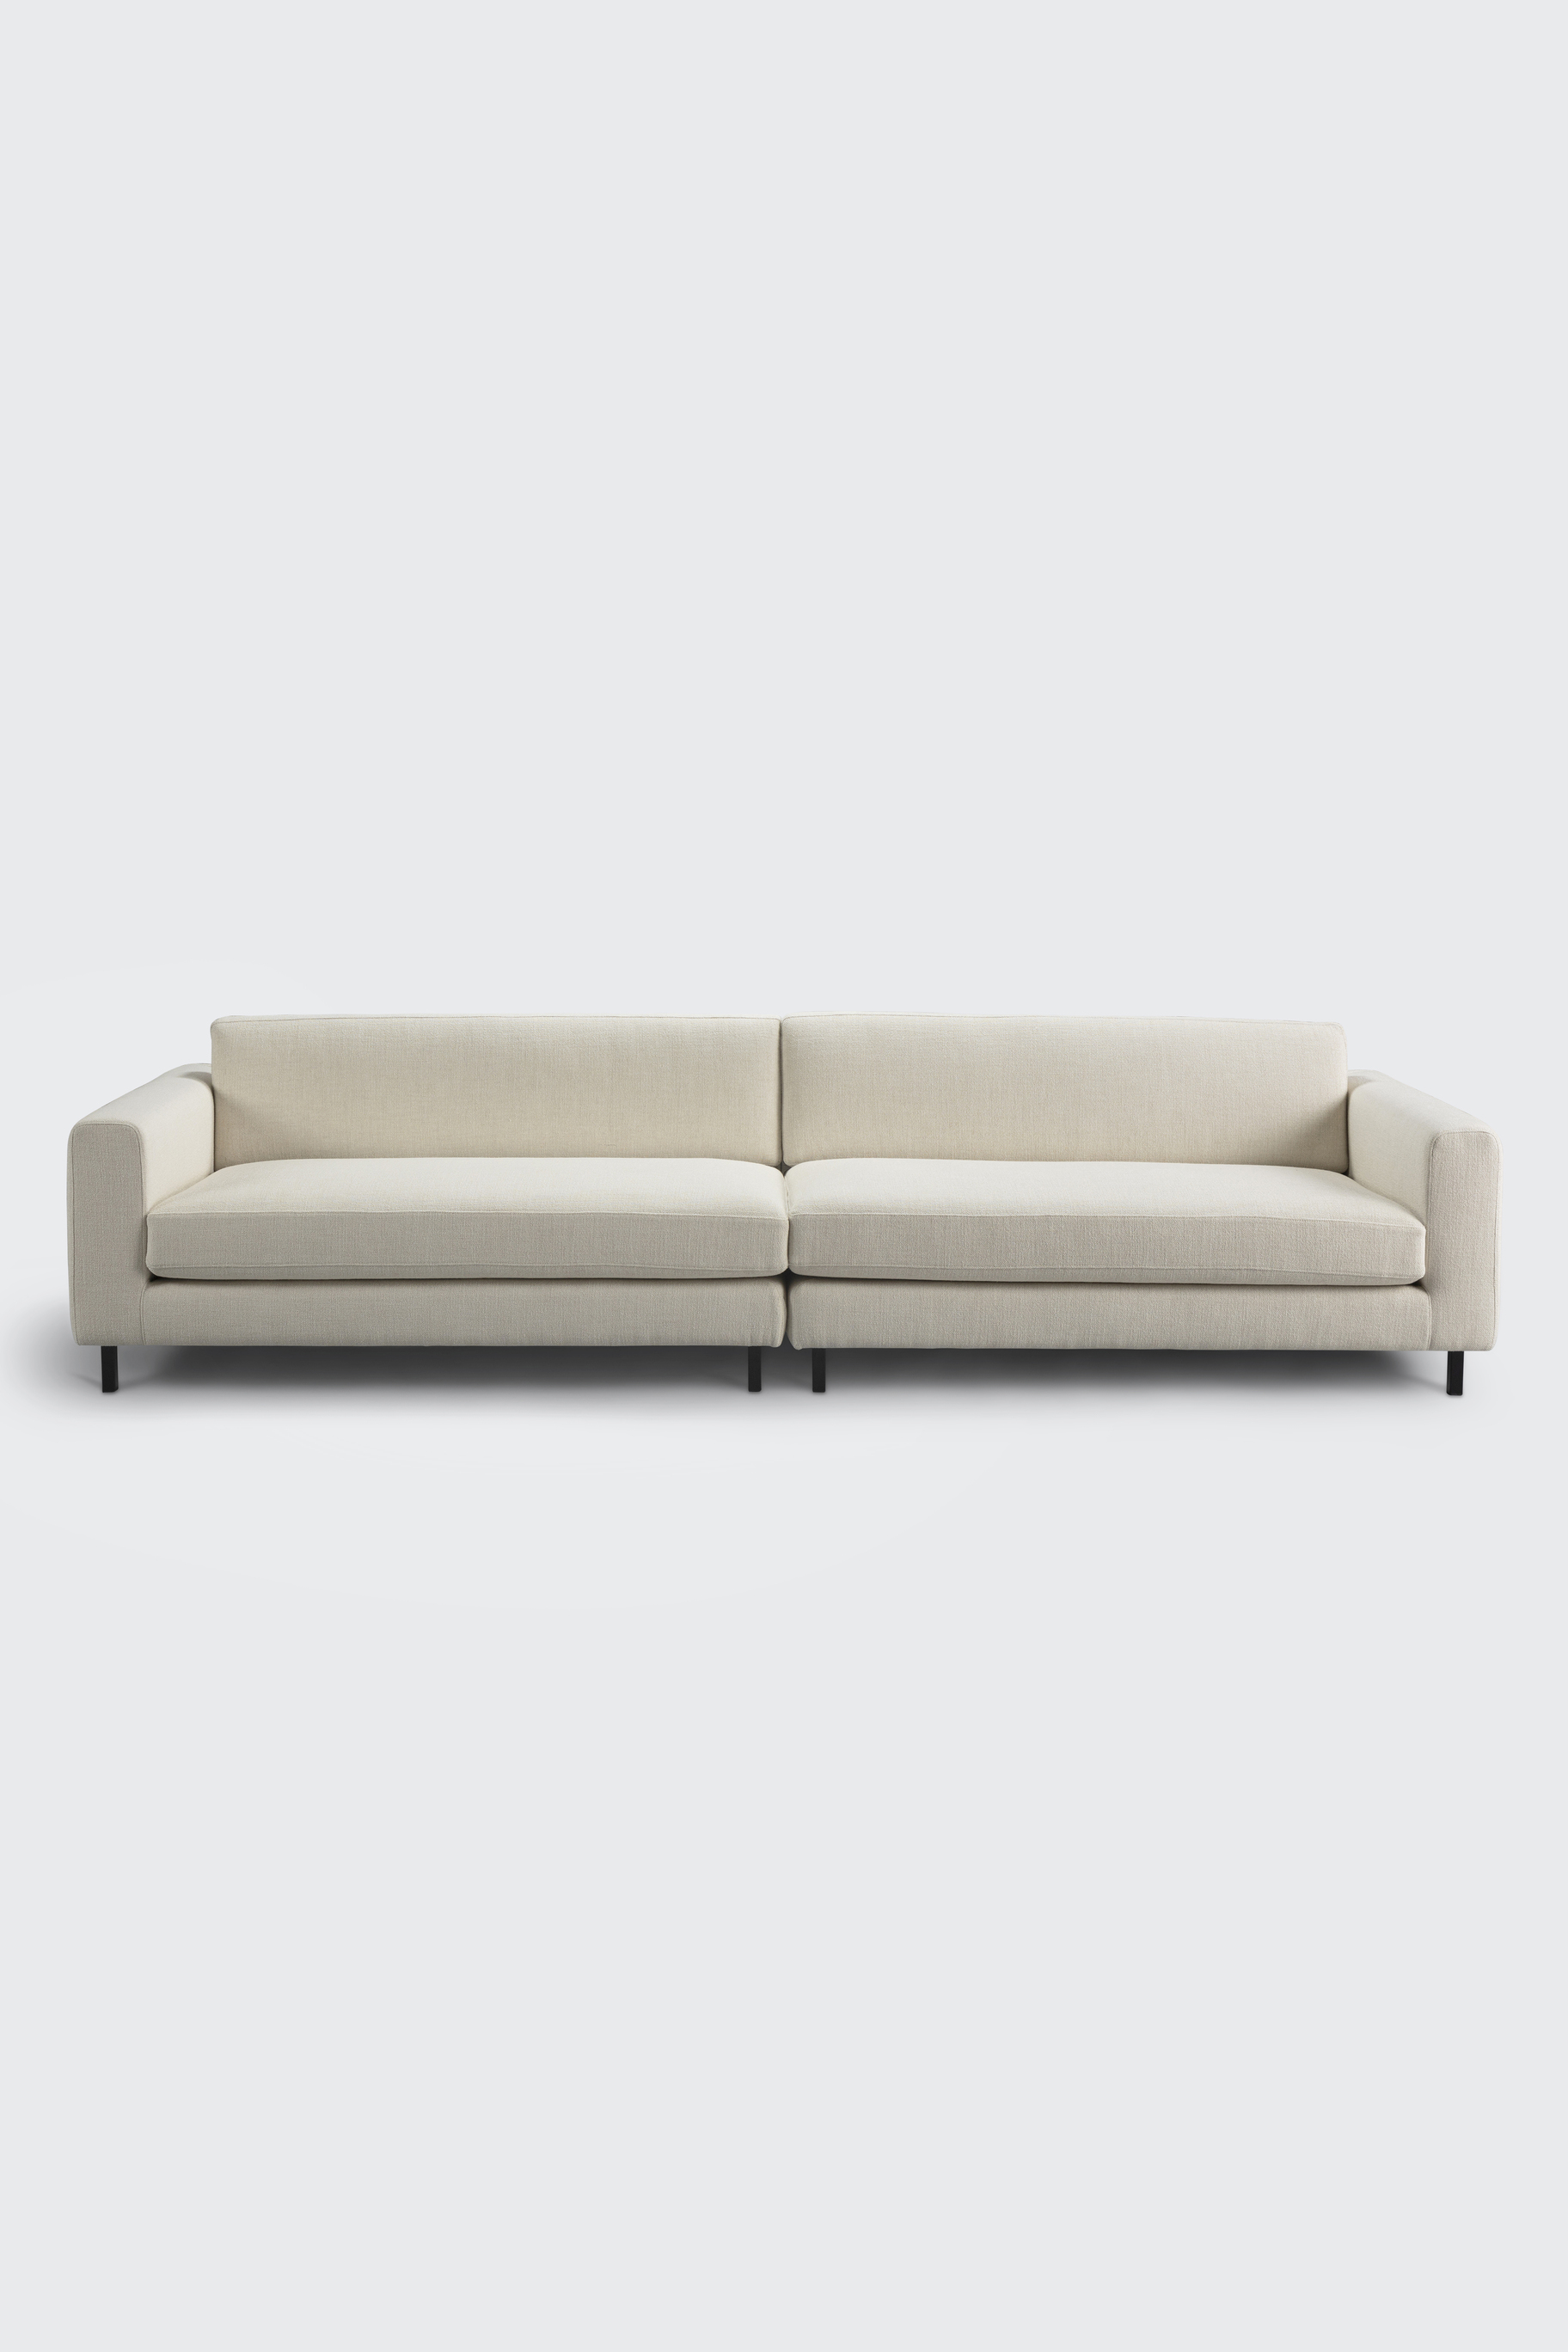 SAV sofa timeless 320 cream interior design architecture product furniture luxury_resistant style living room noble lined 320cm decor two separated modules timeless collection